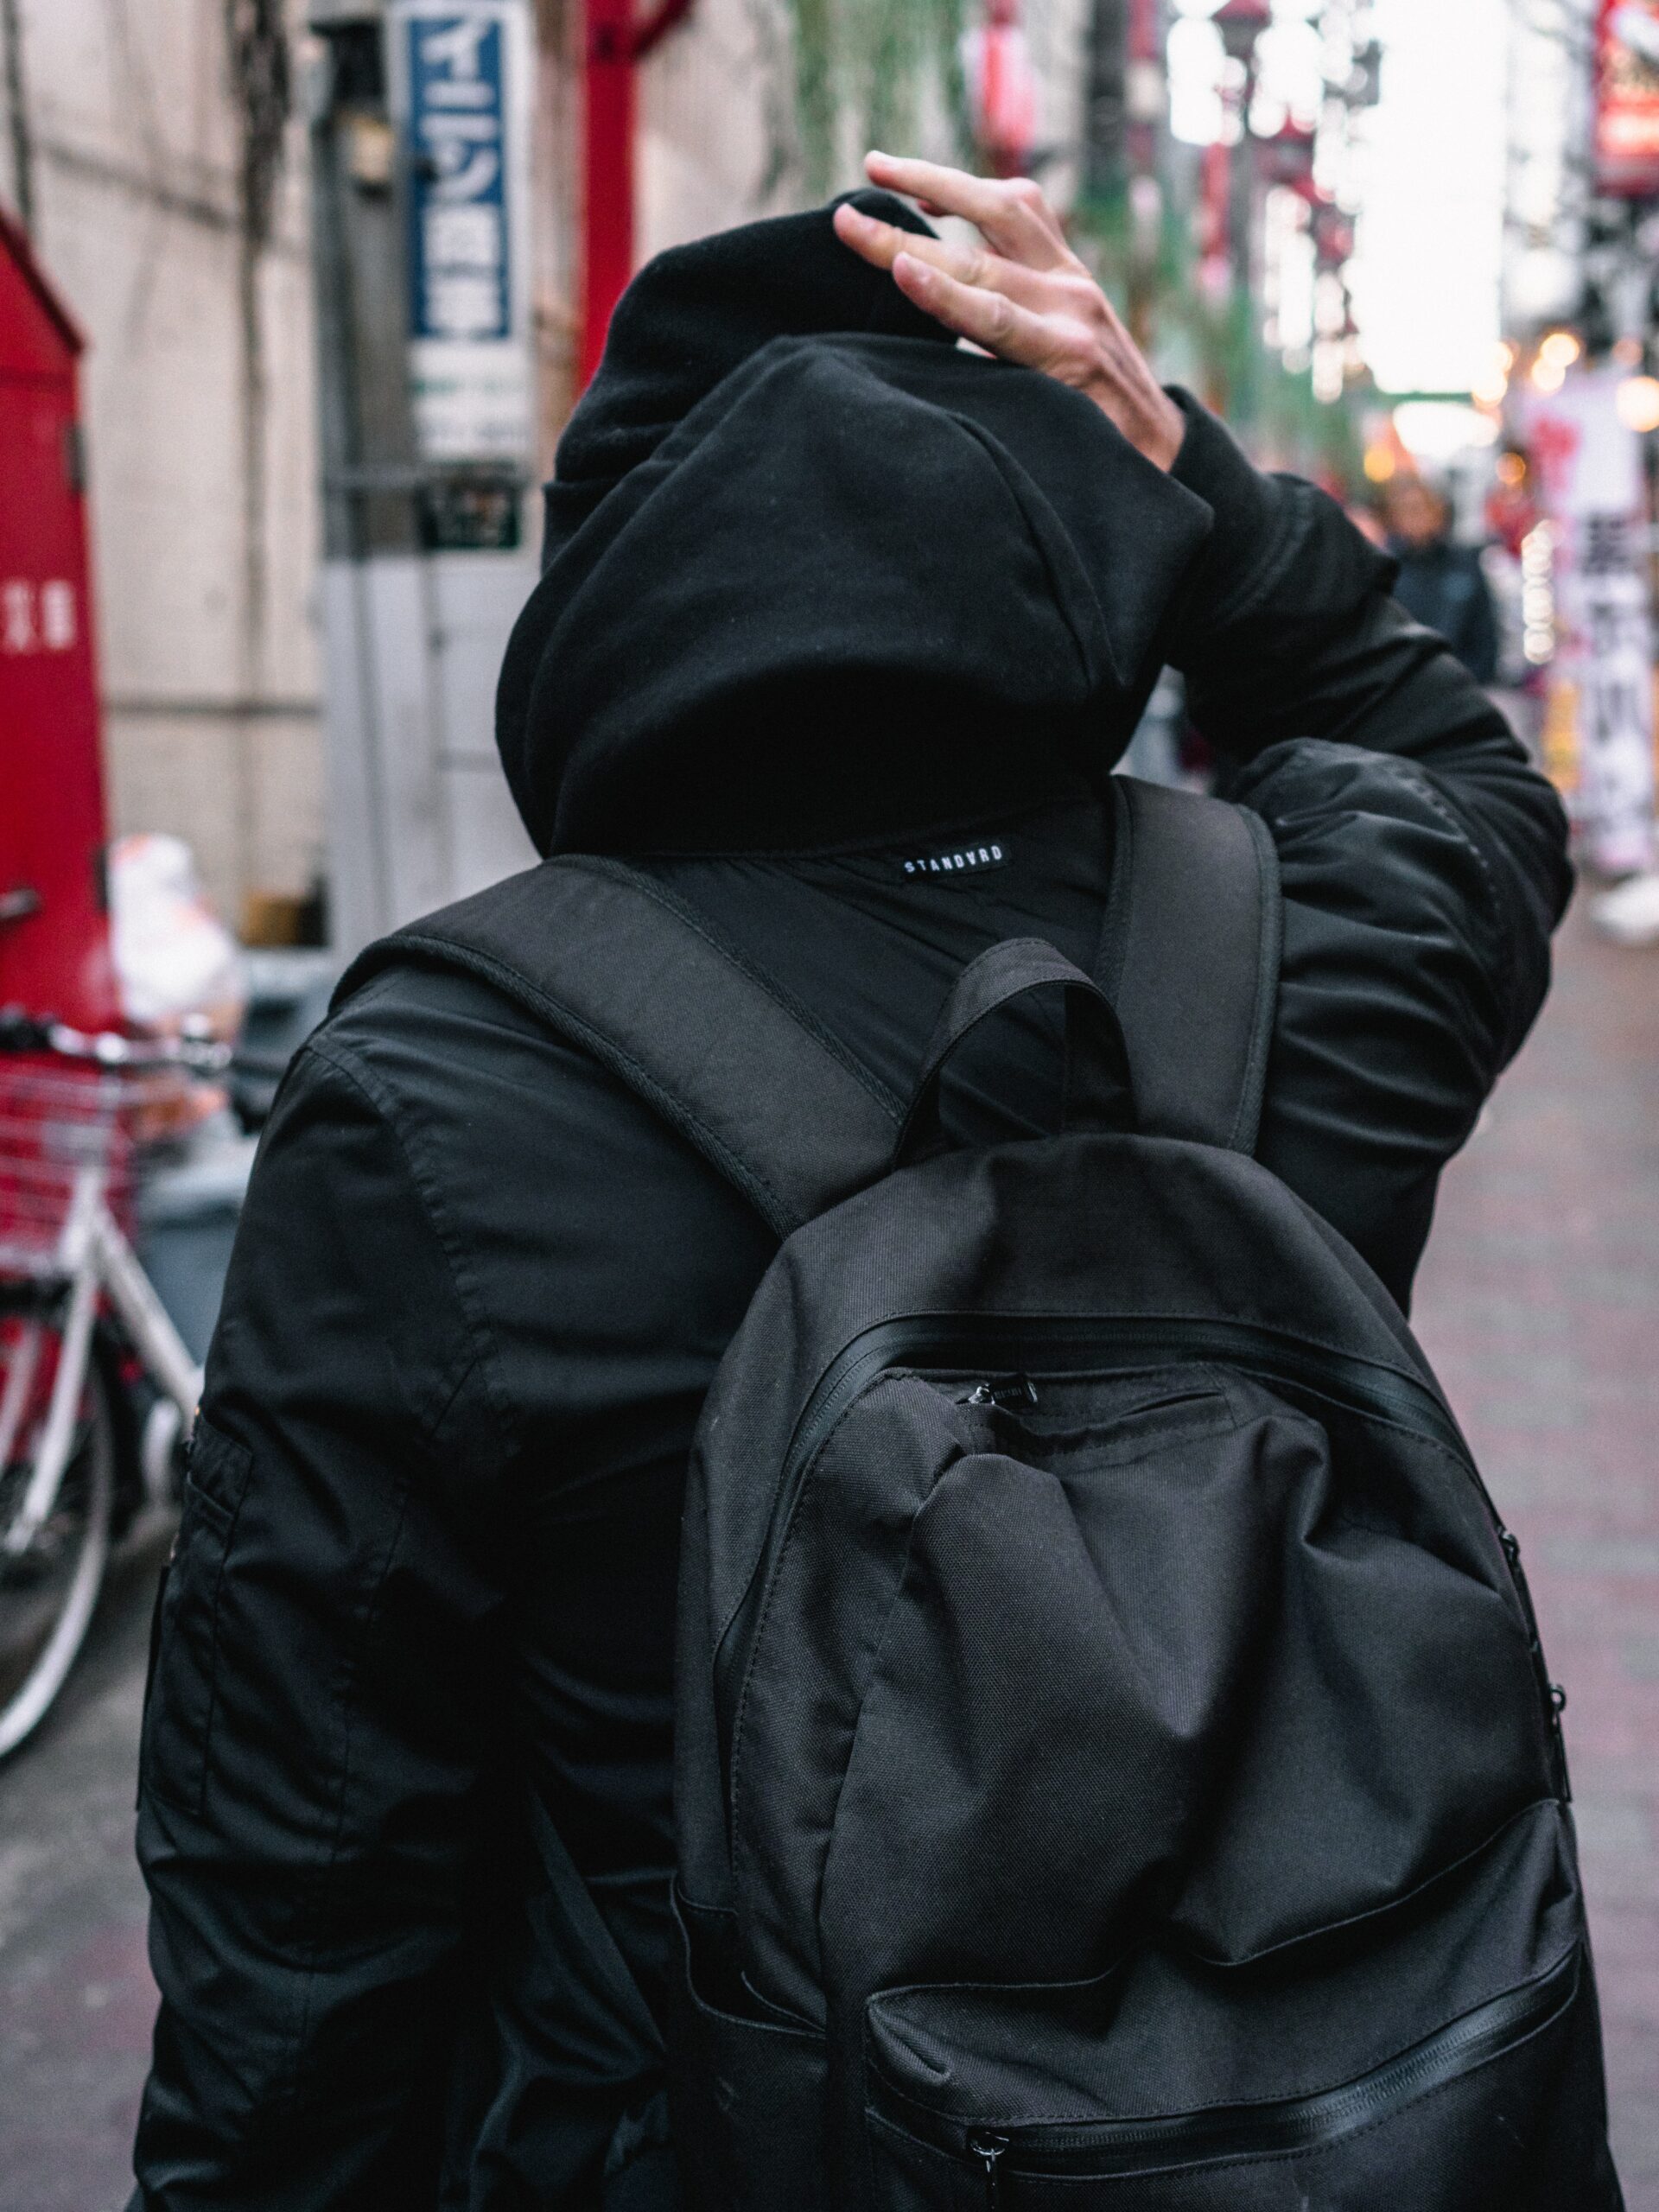 A person wearing a black backpack and walking in a narrow street image